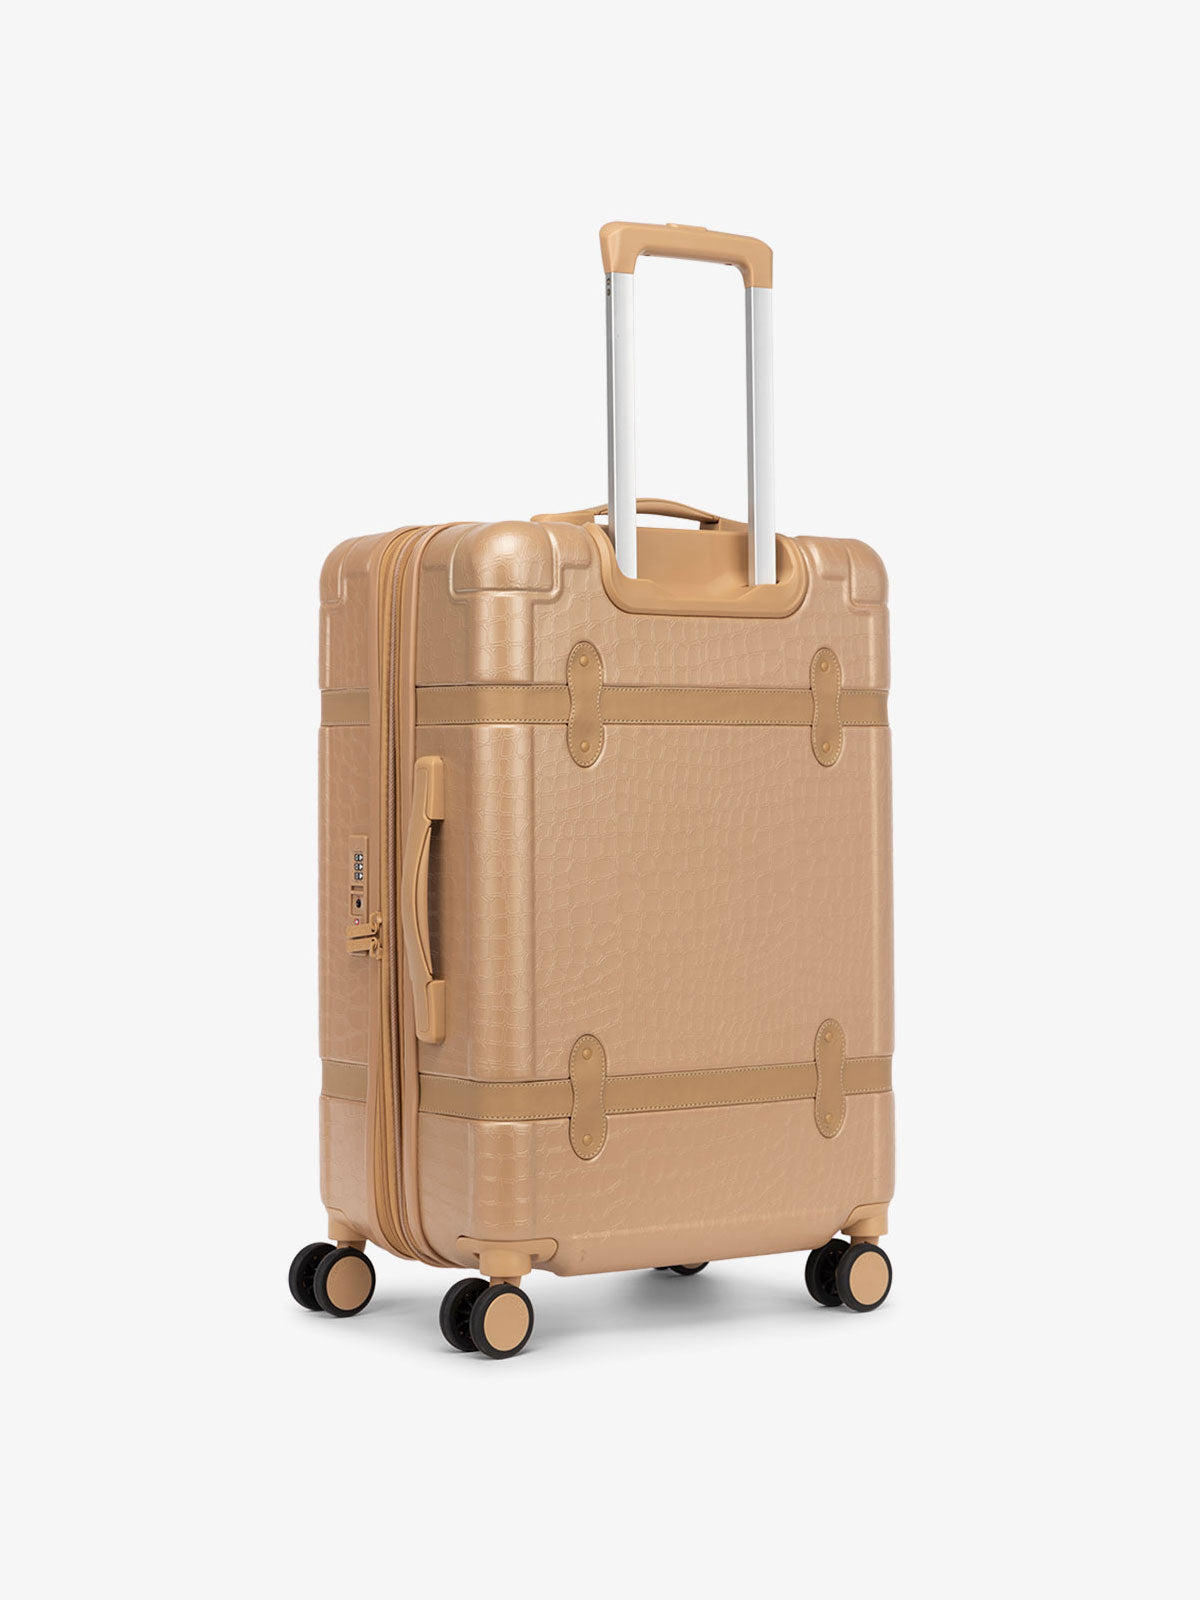 rolling hard shell beige almond suitcase as a part of CALPAK TRNK luggage collection in vintage trunk style